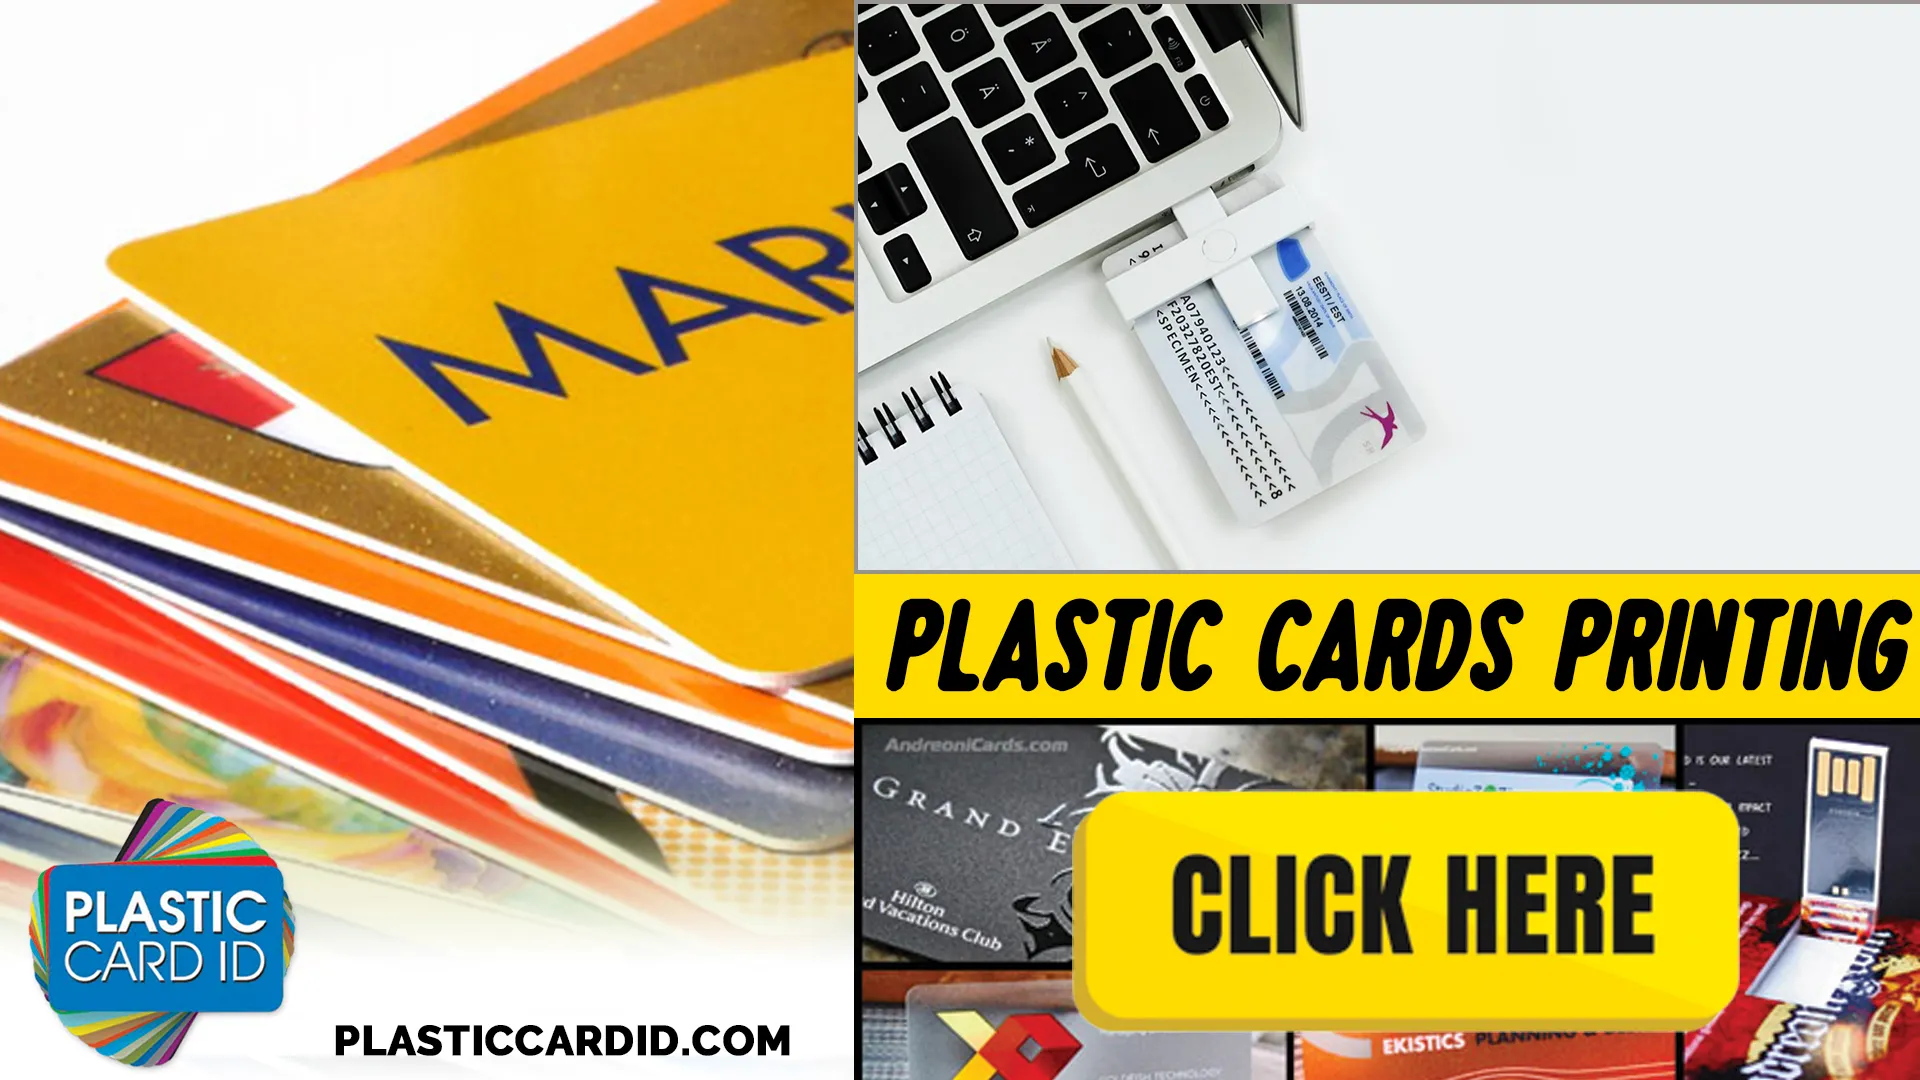 The Power of Barcodes and QR Codes on Plastic Cards